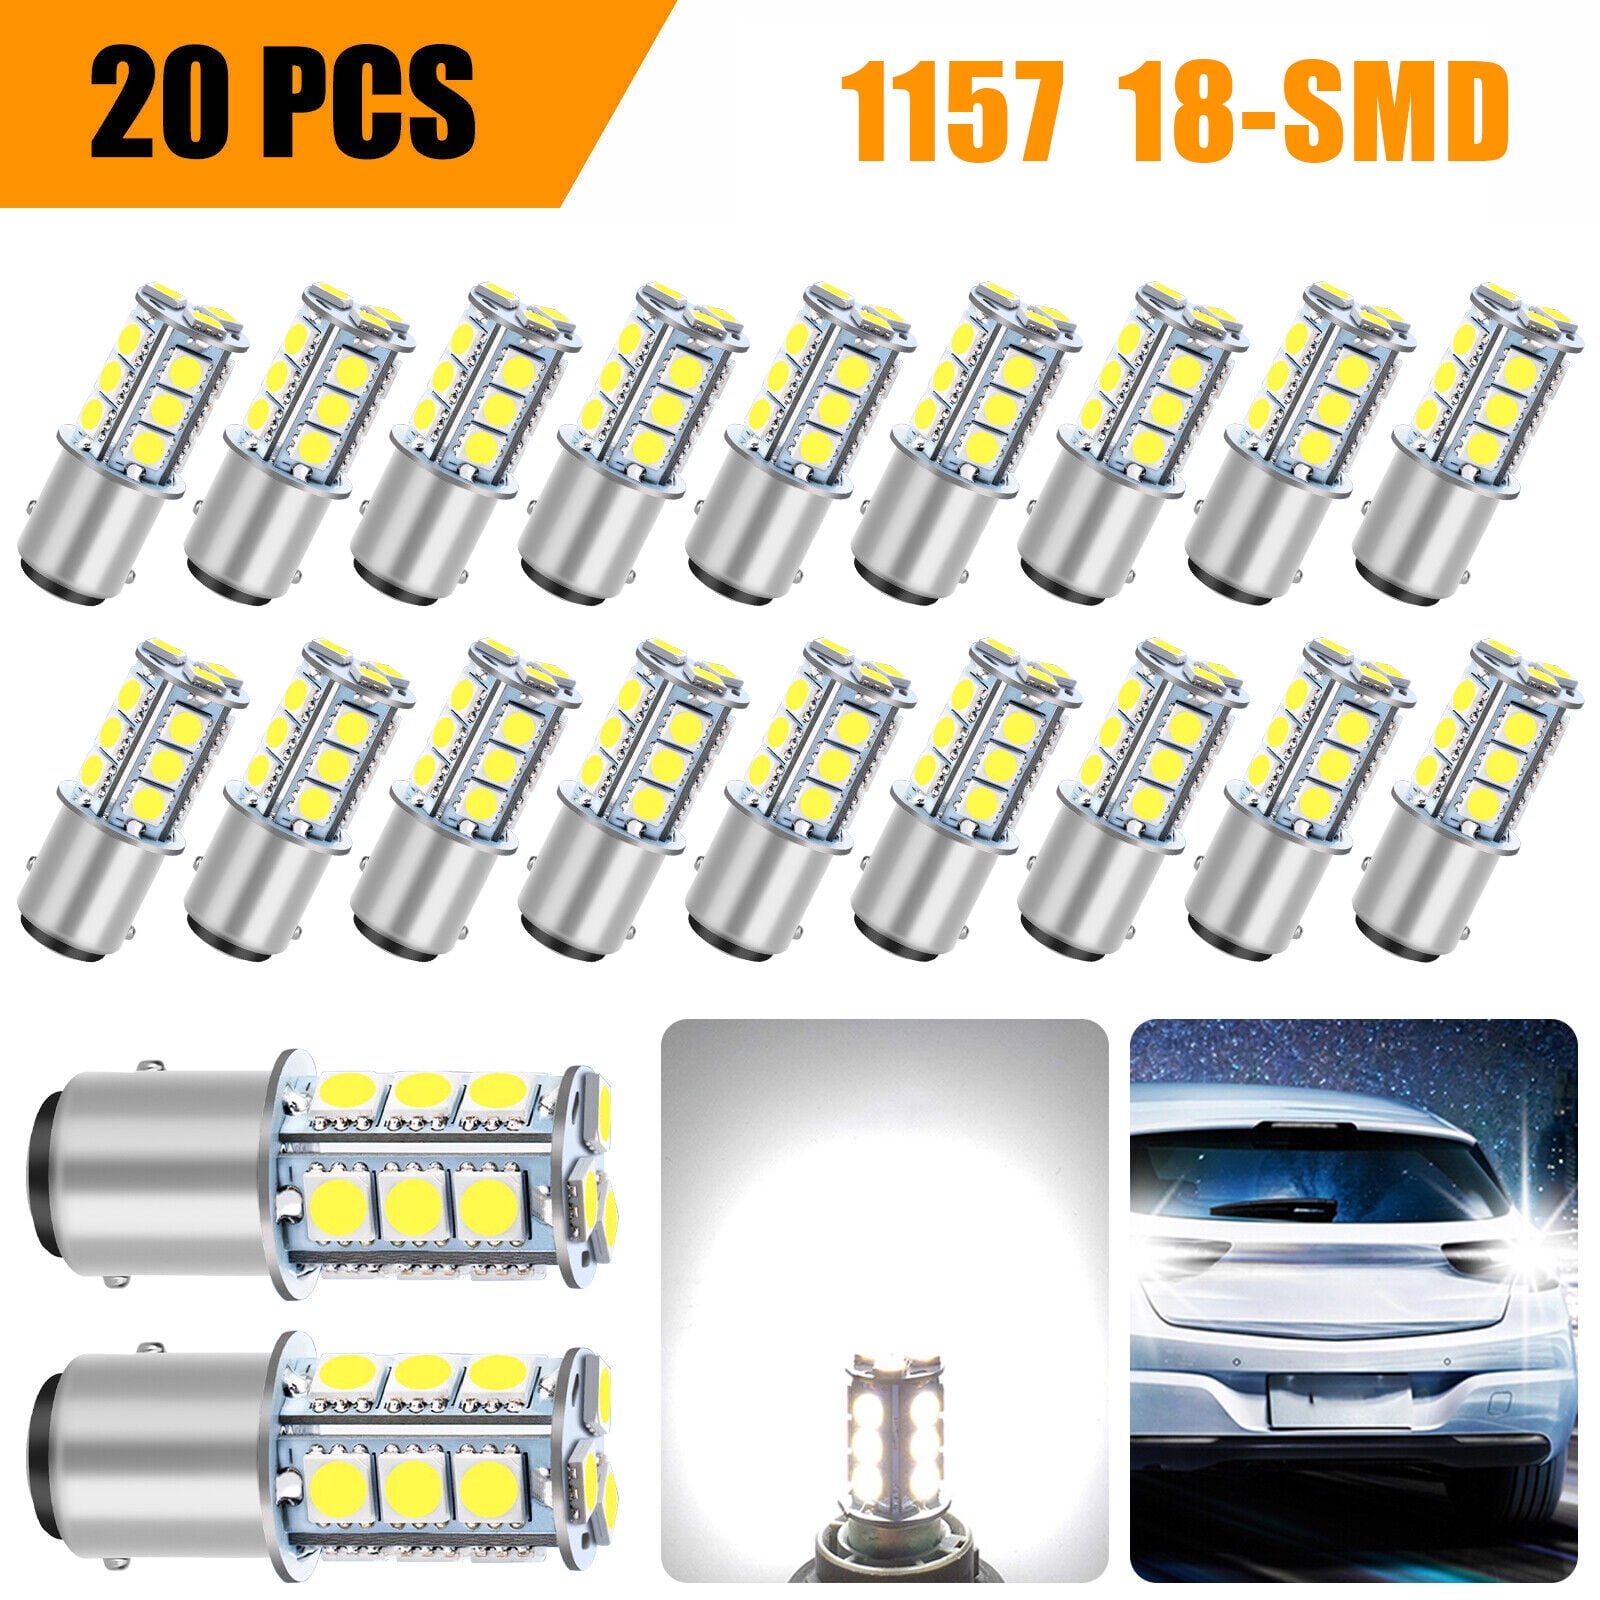 1157 BAY15D 2057 2357 7528 Led Bulbs Replacement for RV Camper Motorcycle Interior Light Car Backup Reverse Lights 18SMD DC 12V Blue Pack of 4 